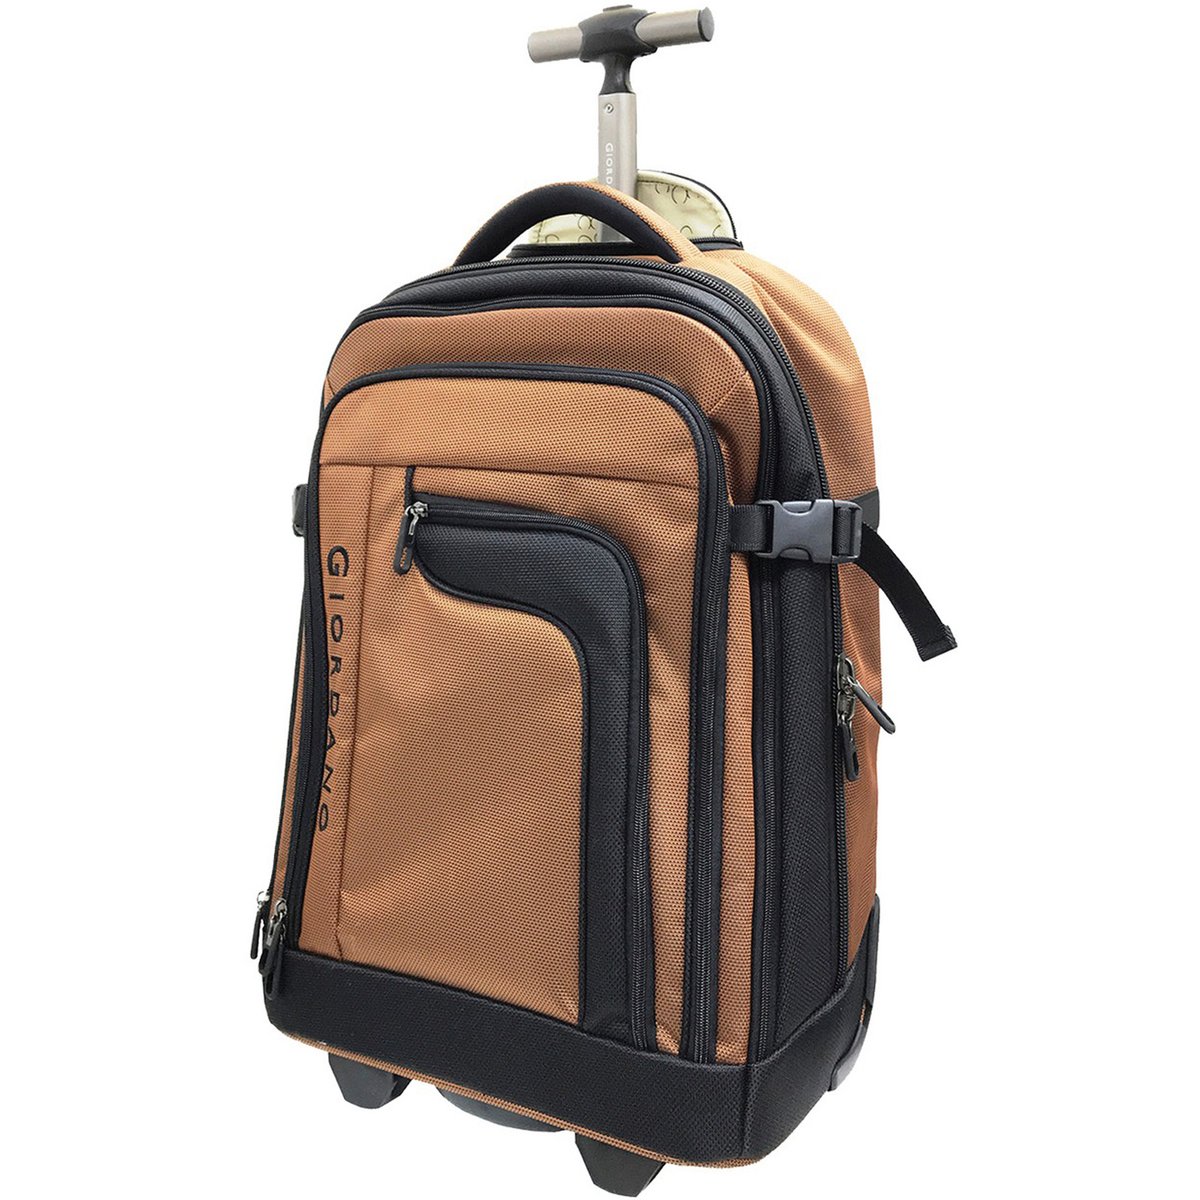 Giordano Trolley Bag 20in Assorted Colors